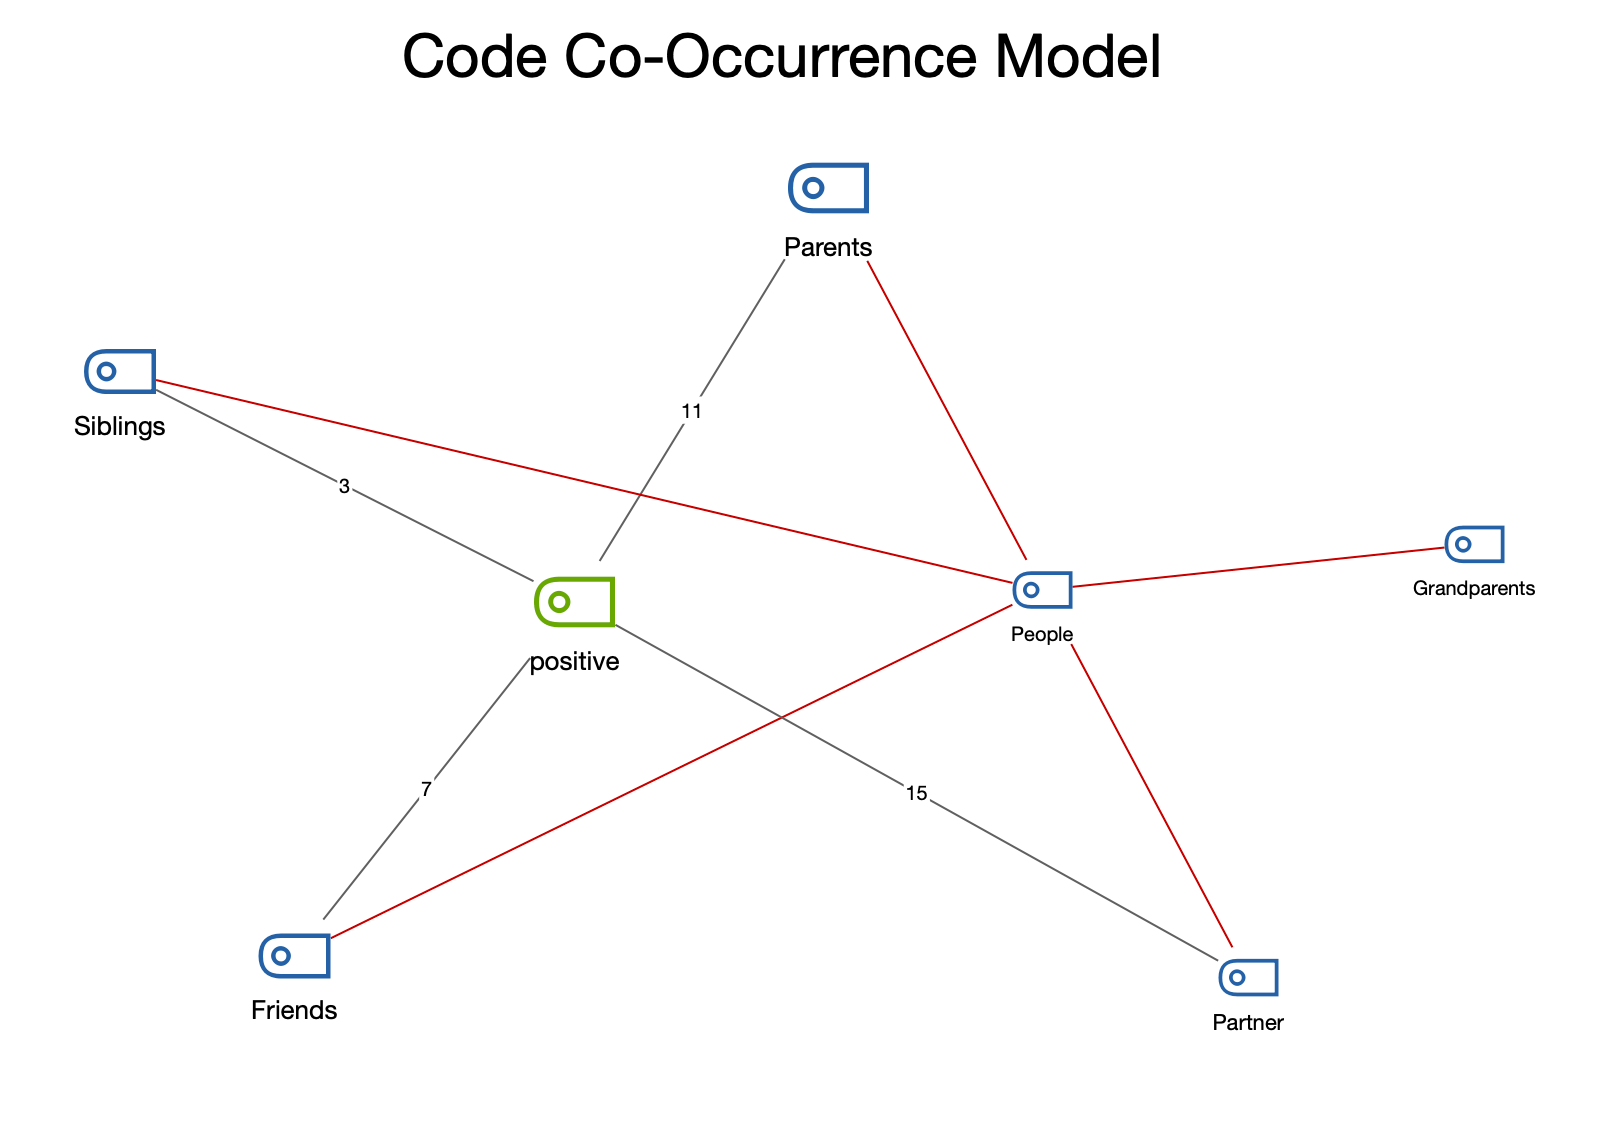 The Code Co-Occurrence Model